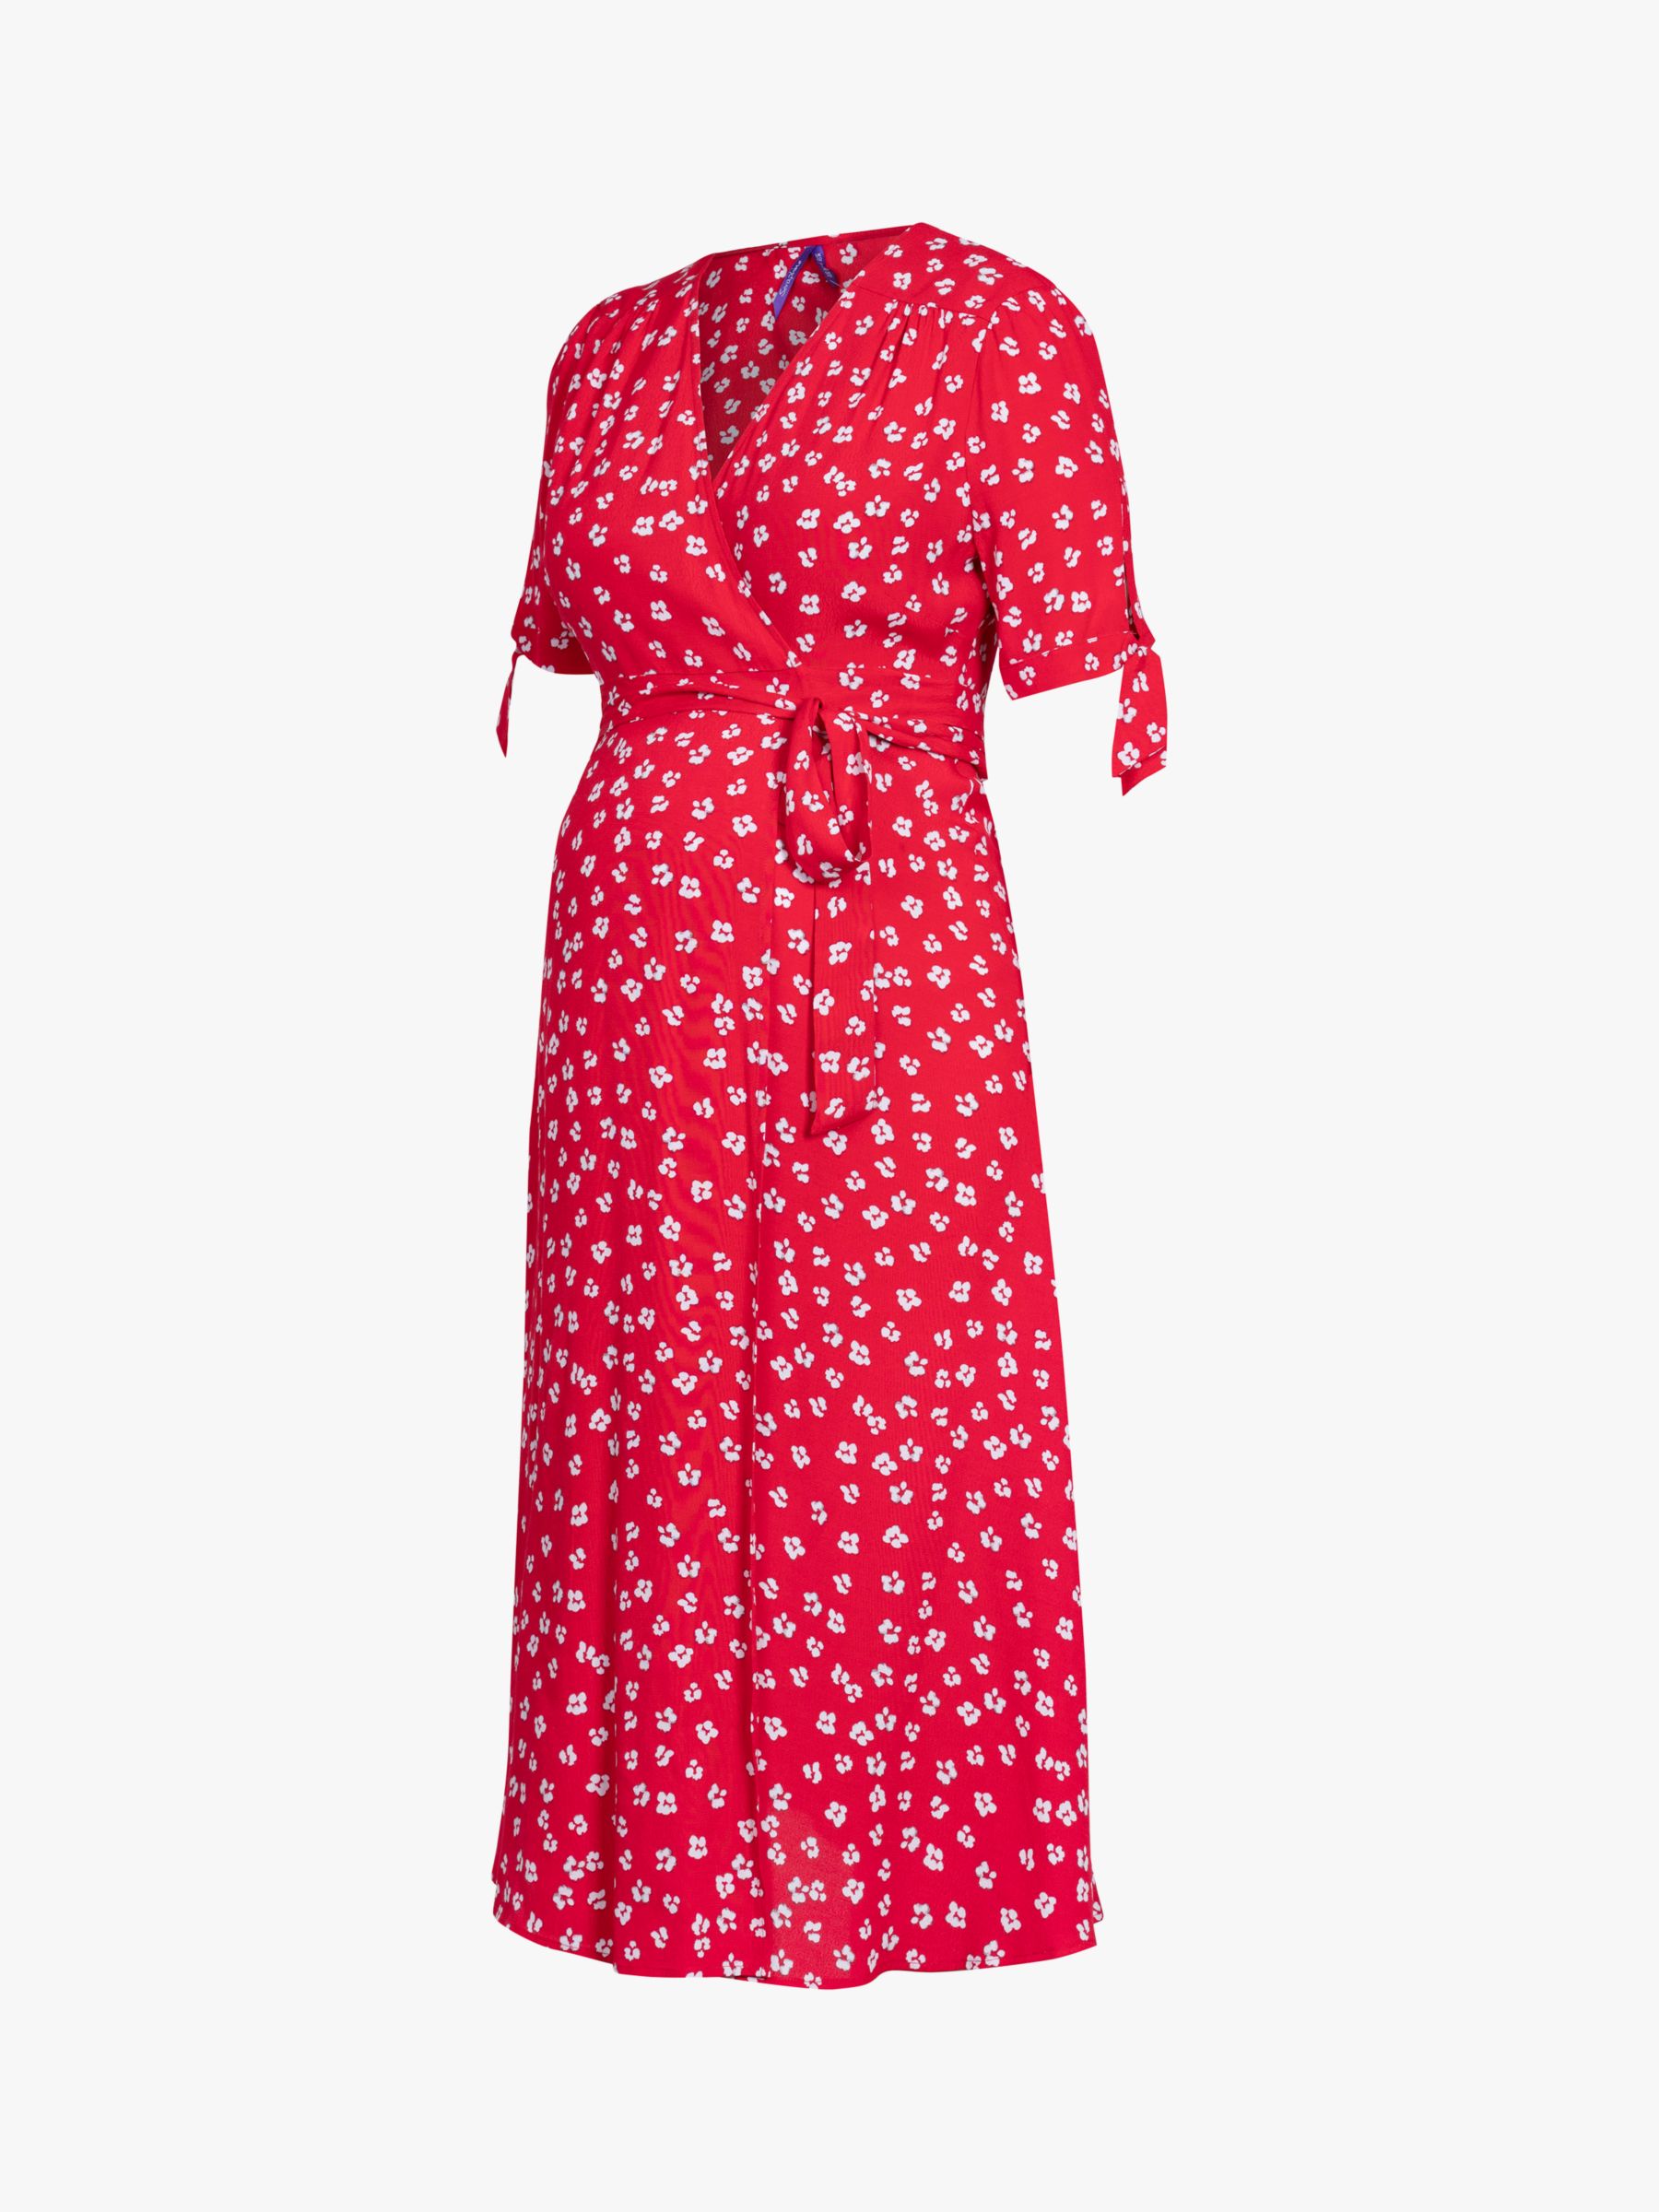 Seraphine Bessie Floral Maternity Dress, Red at John Lewis & Partners